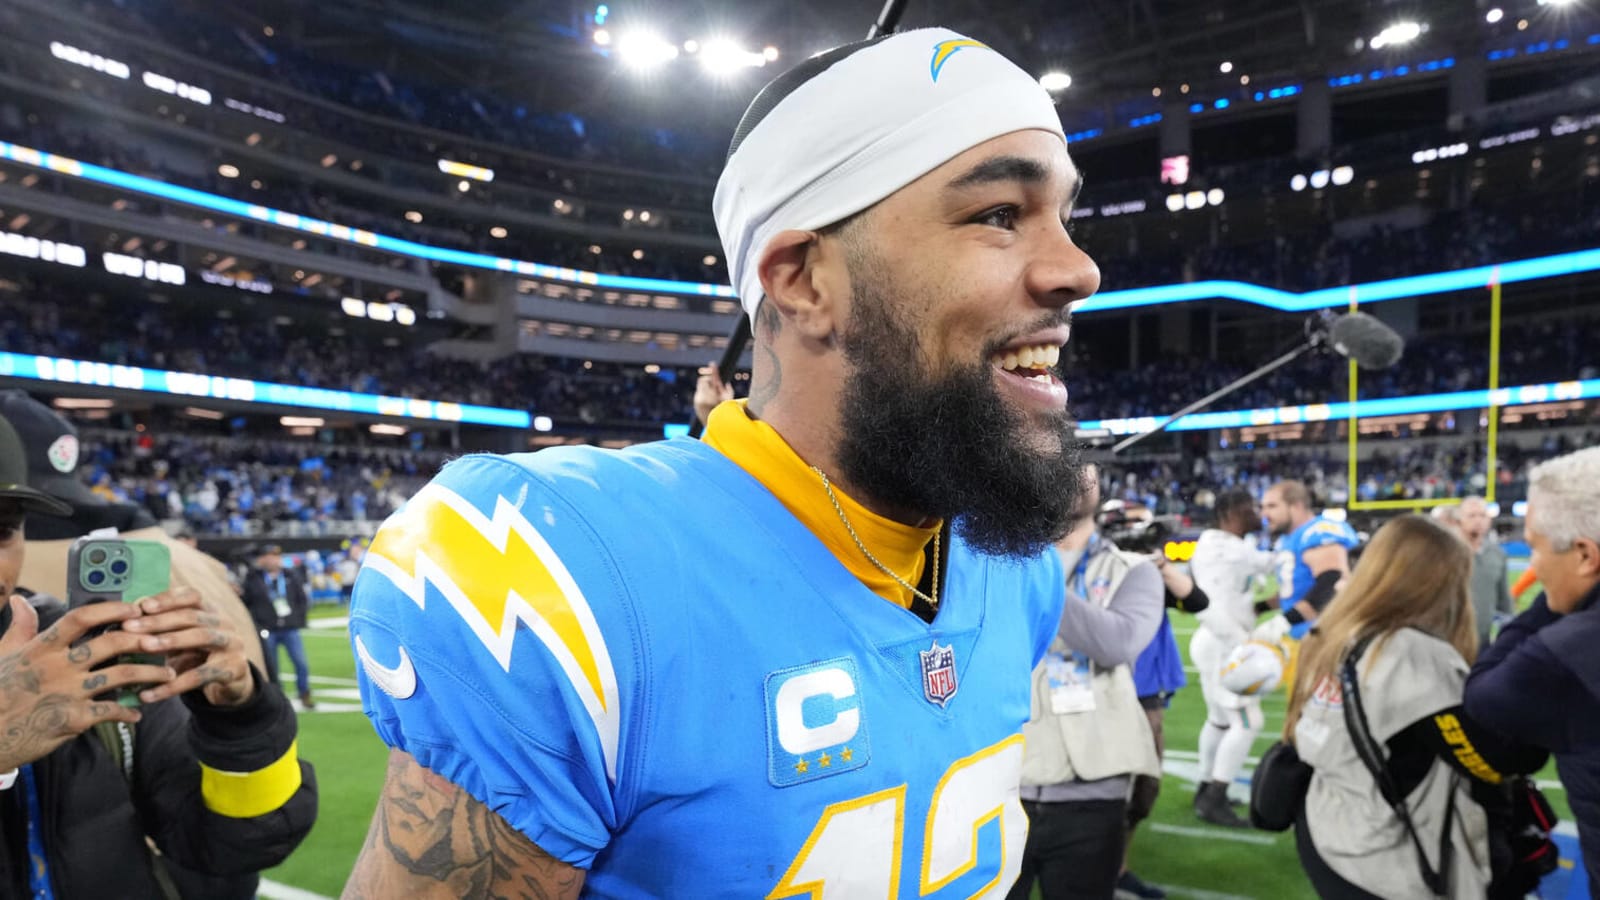 Chargers GM addresses Keenan Allen’s future with the team